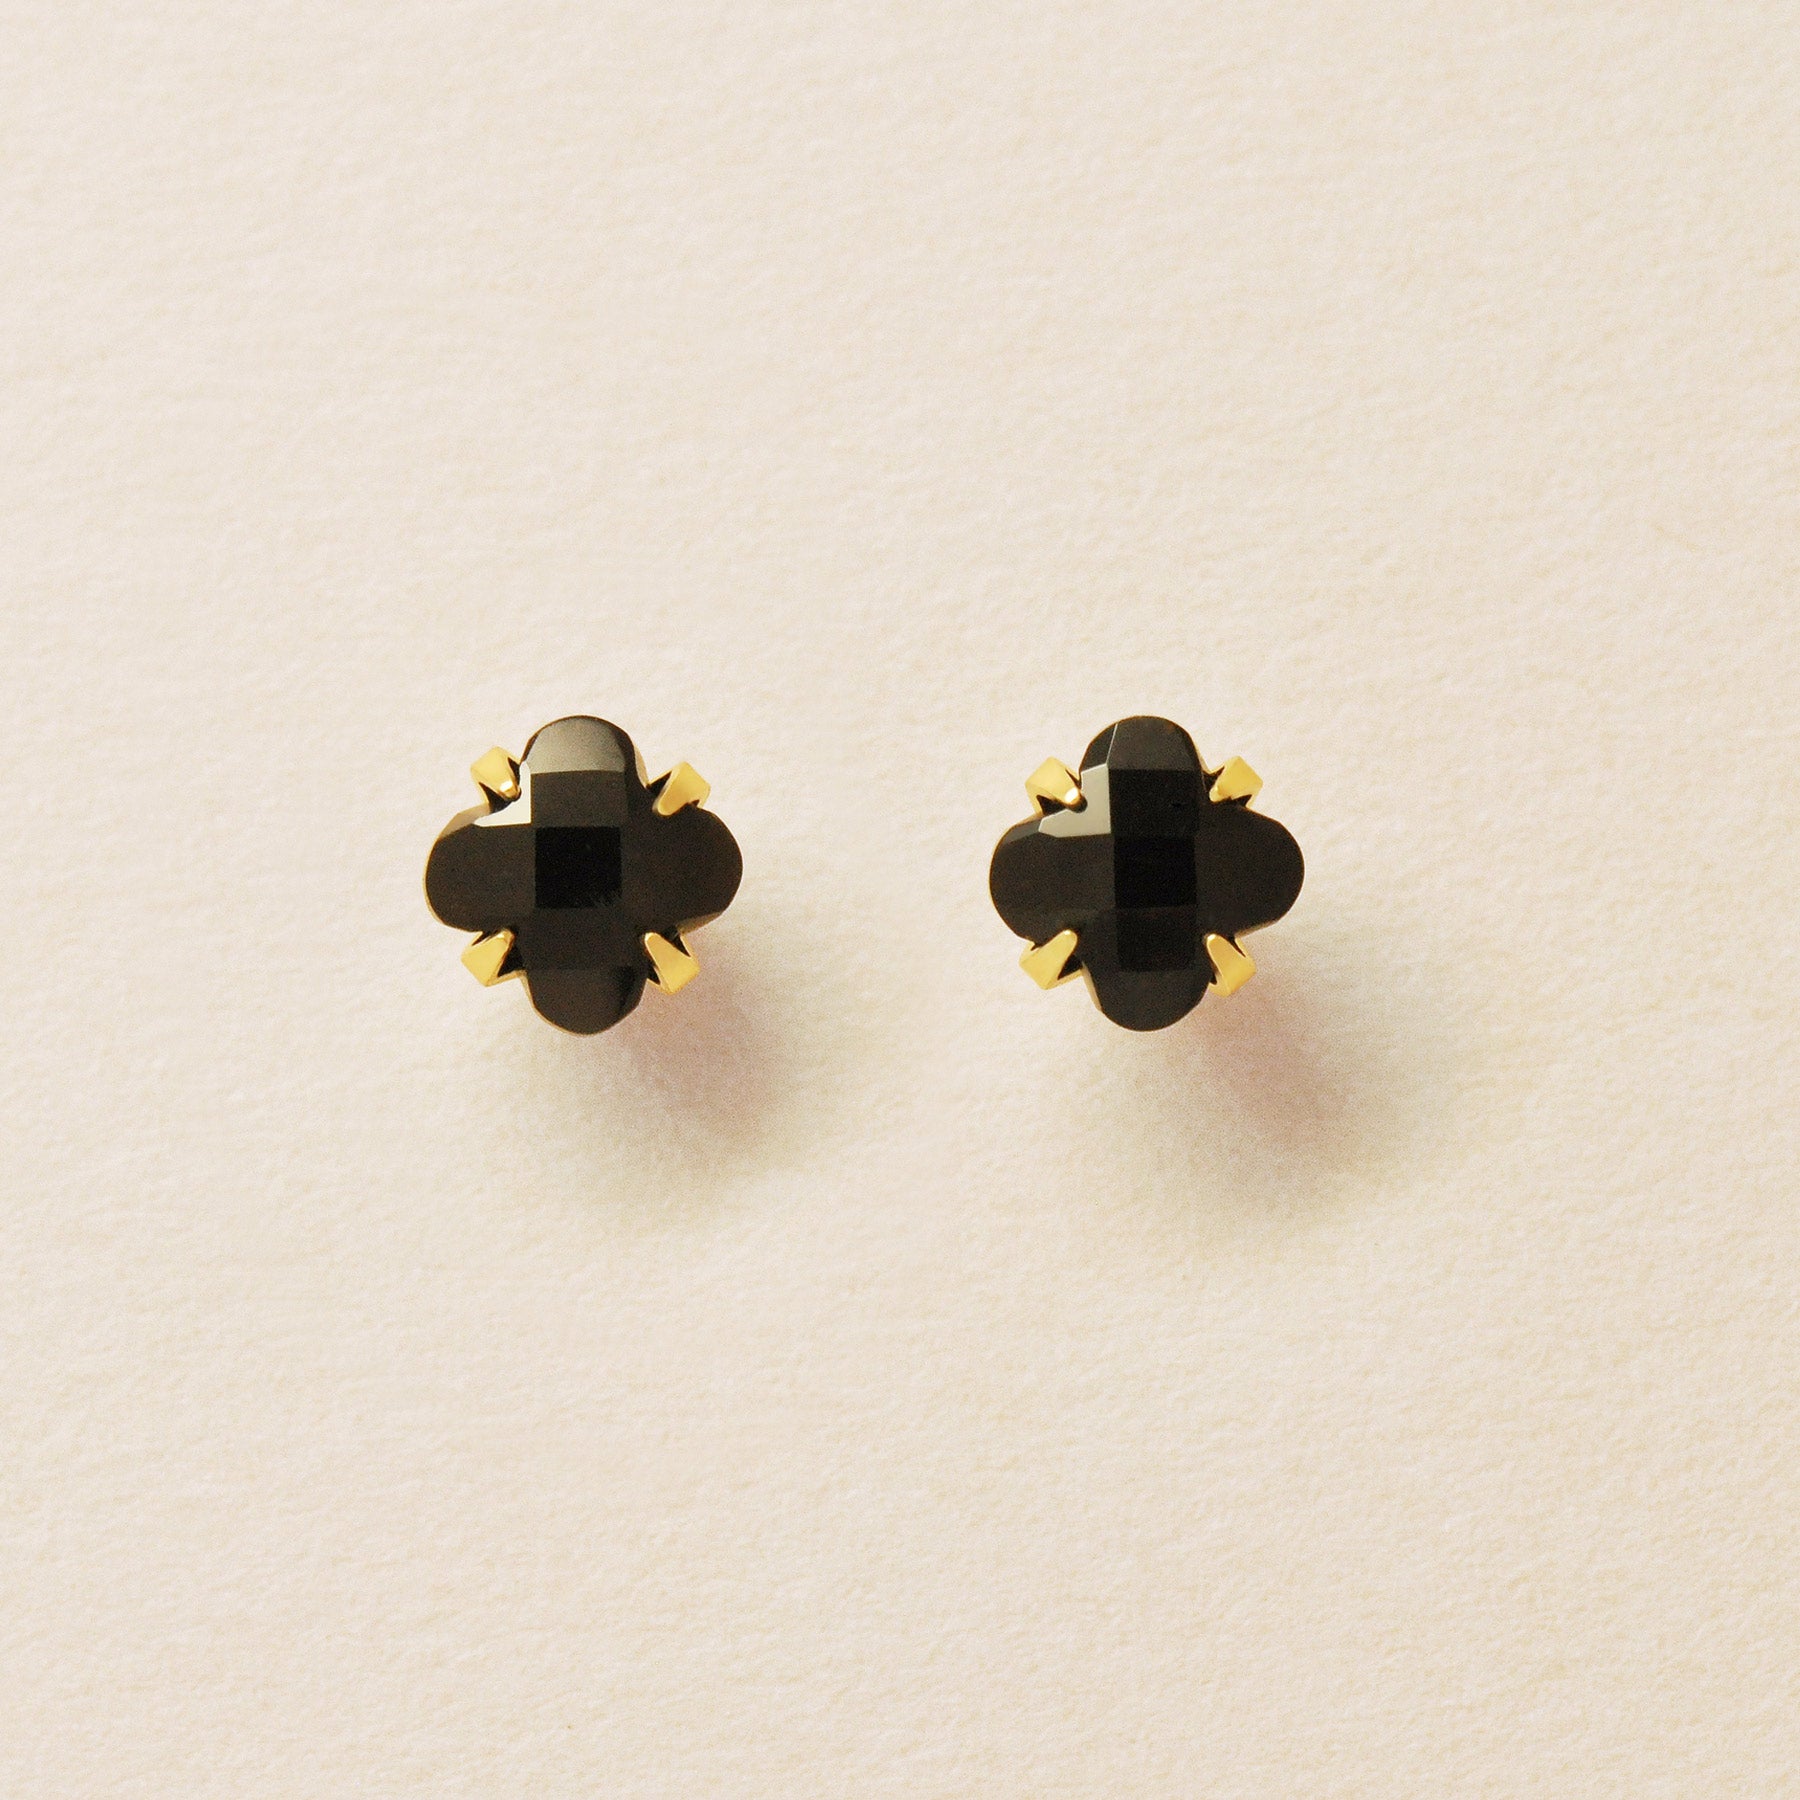 [Second Earrings] 18K Yellow Gold Lily-Cut Onyx Earrings - Product Image